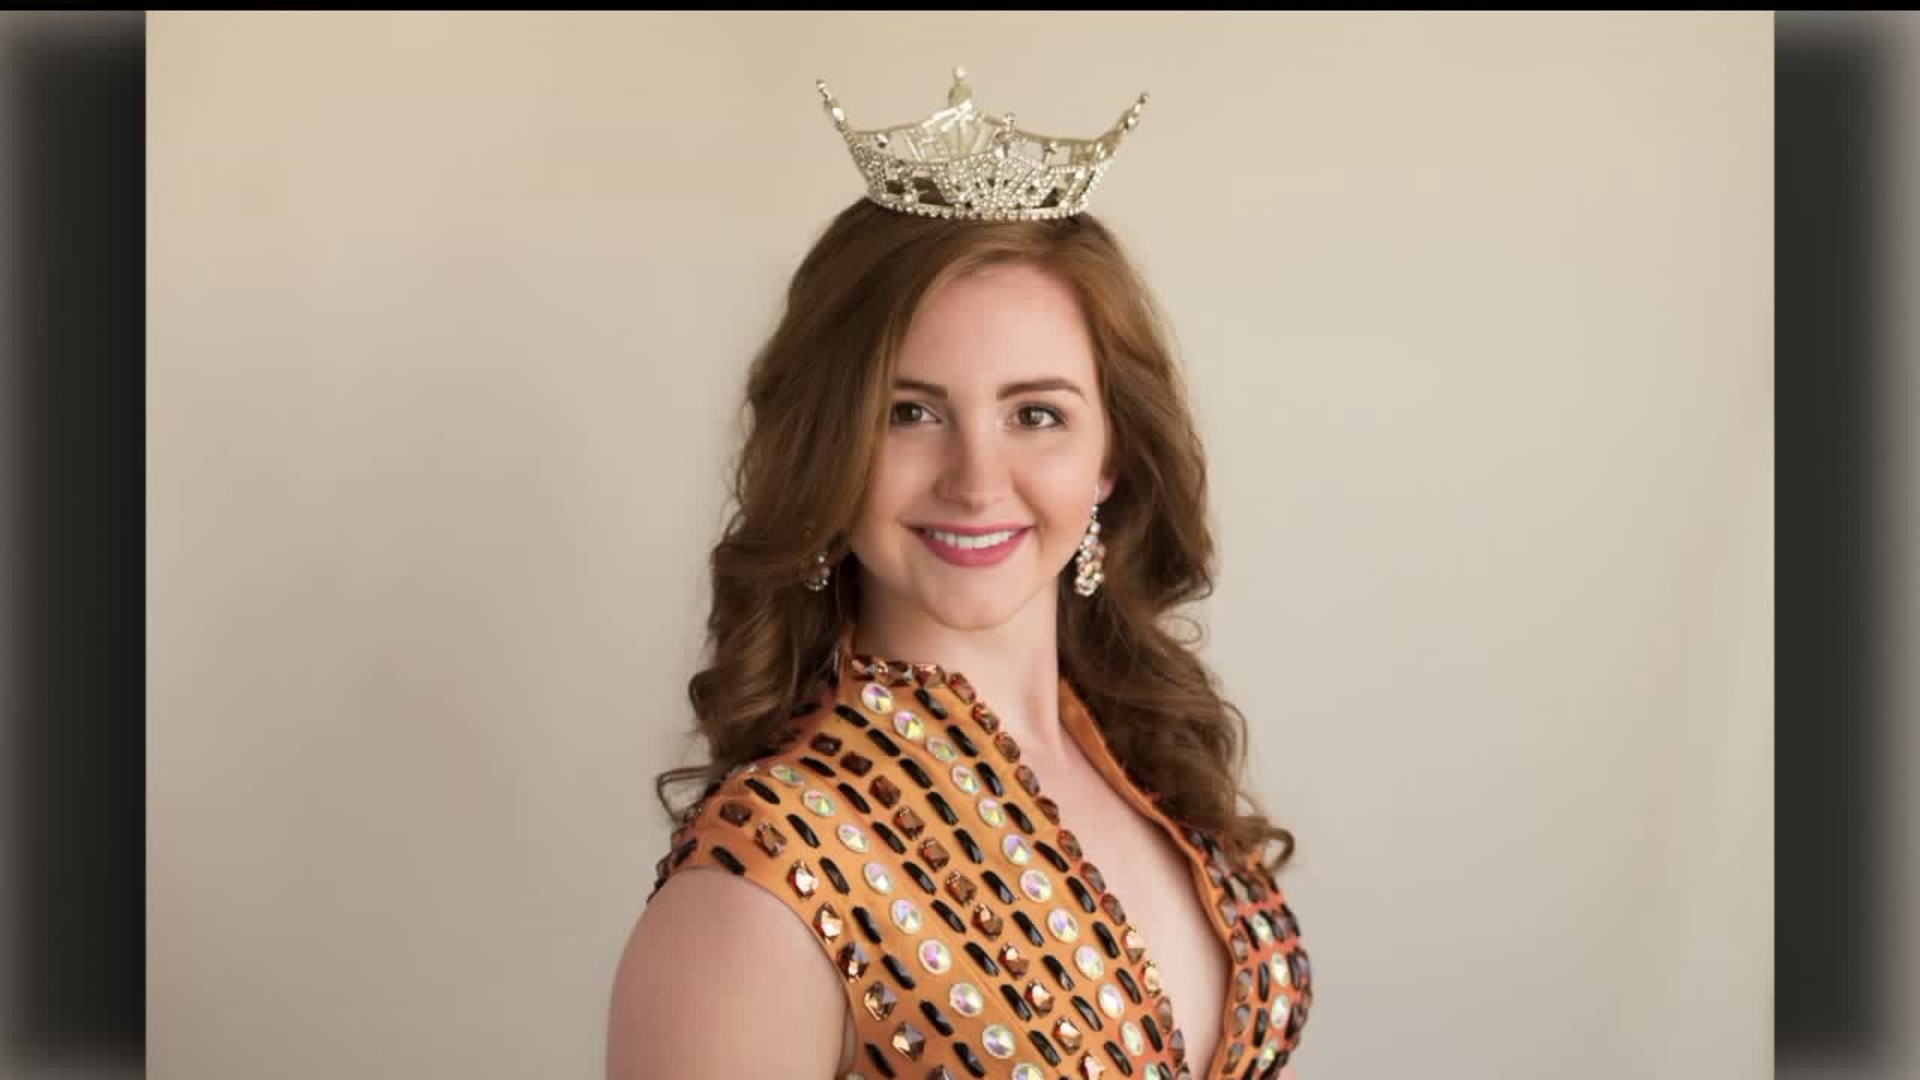 Miss York County 2019 promotes early Autism awareness